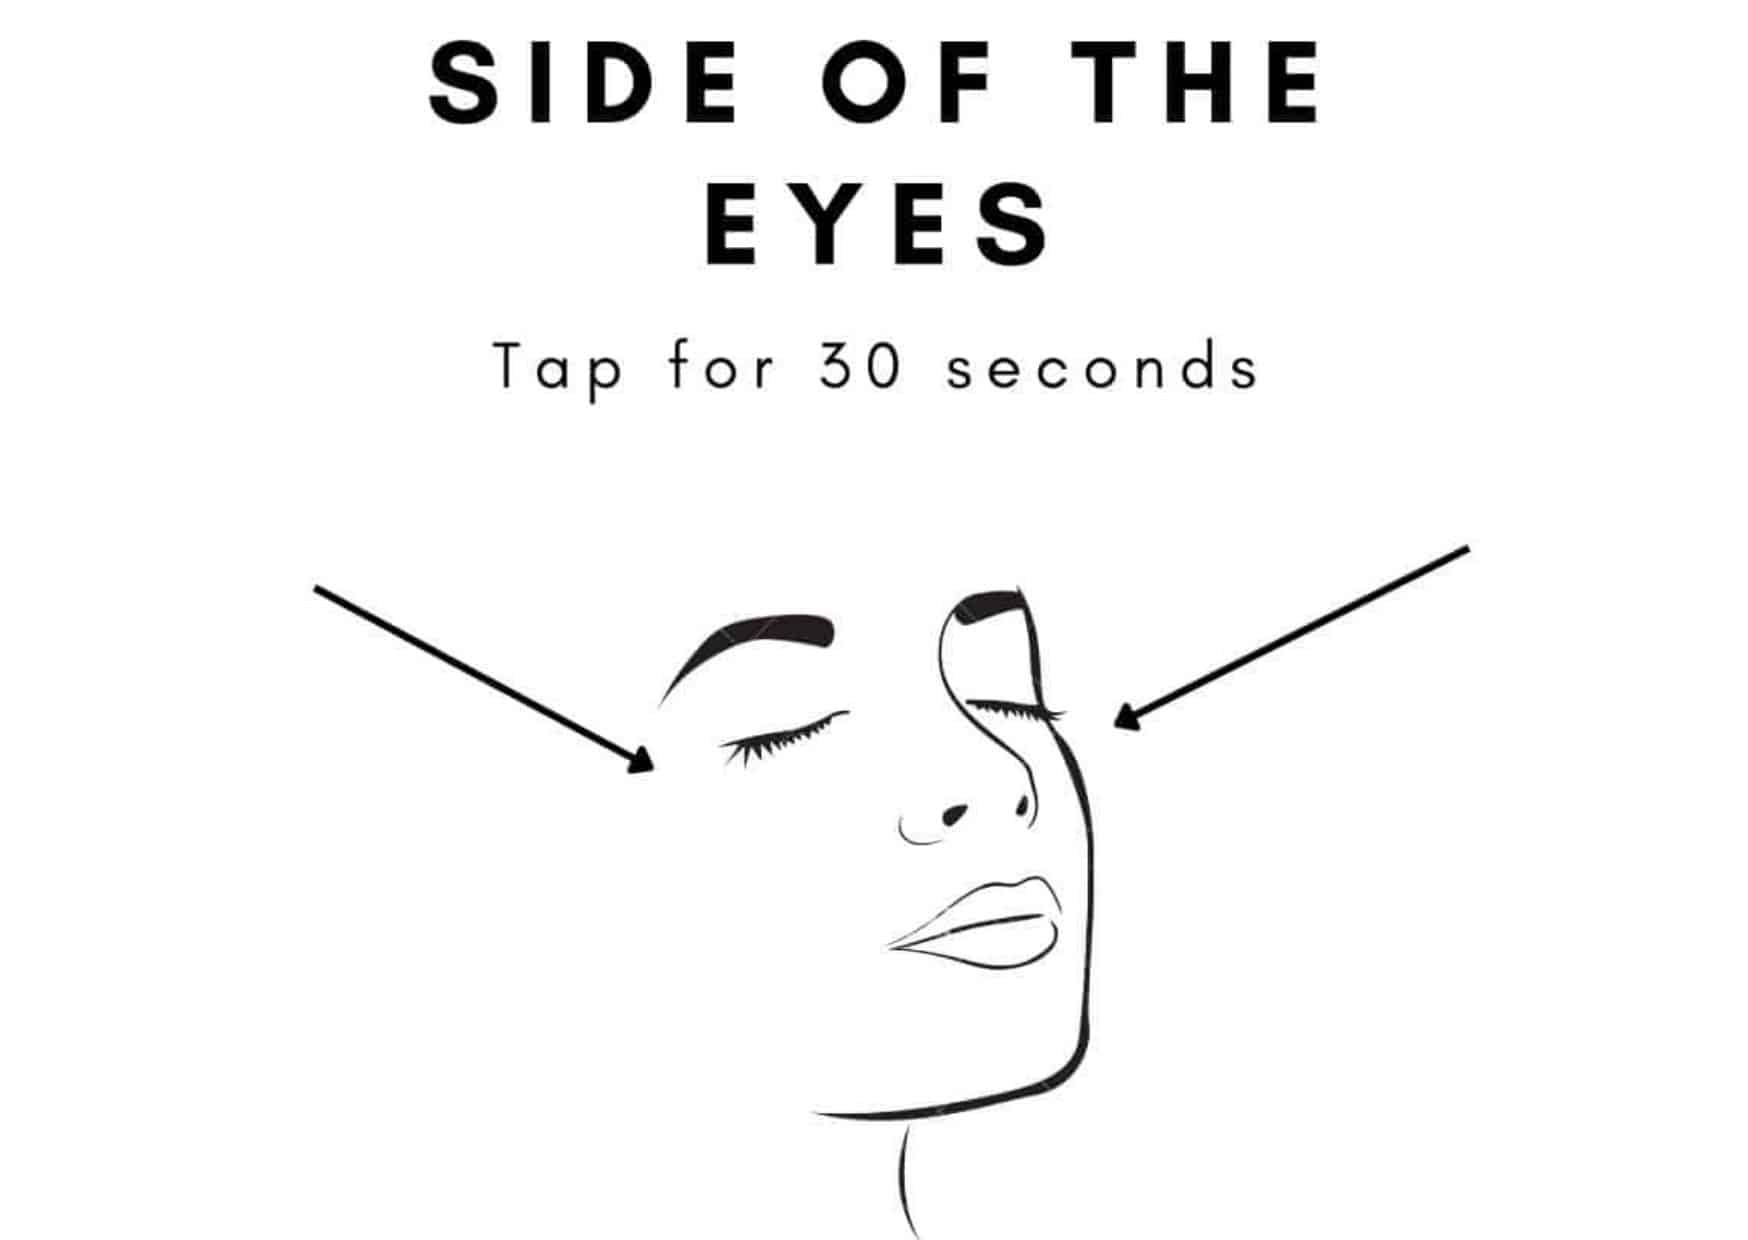 tapping the side of the eyes